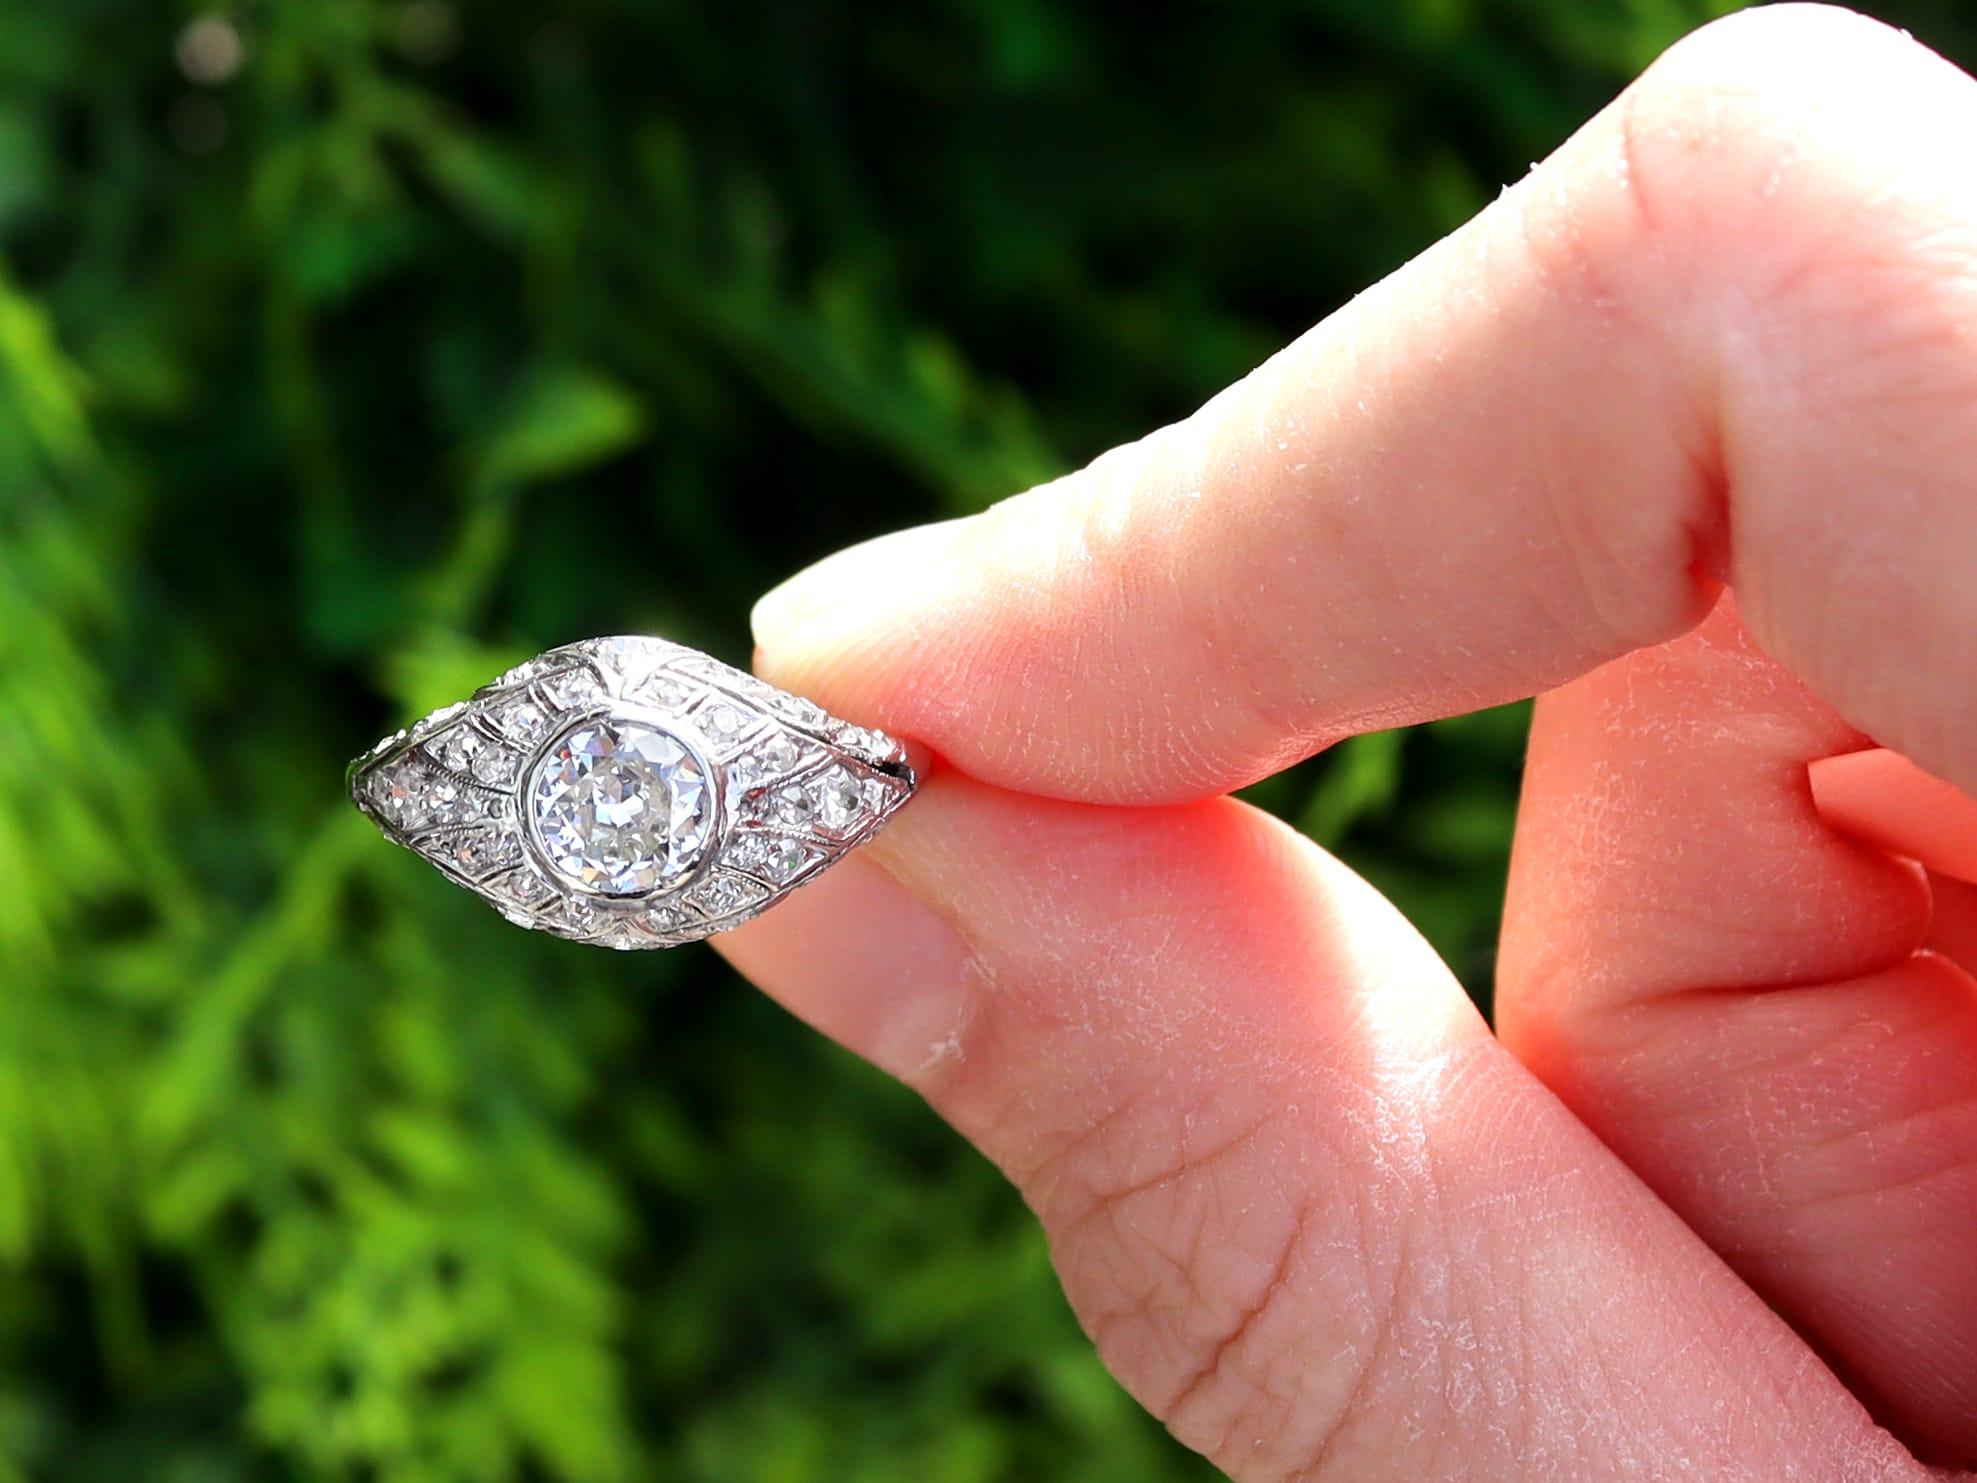 A stunning, fine and impressive antique 1920s Art Deco 1.14 carat diamond and platinum dress ring; part of our diverse antique Art Deco jewellery collections.

This stunning, fine and impressive Art Deco ring has been crafted in platinum.

The